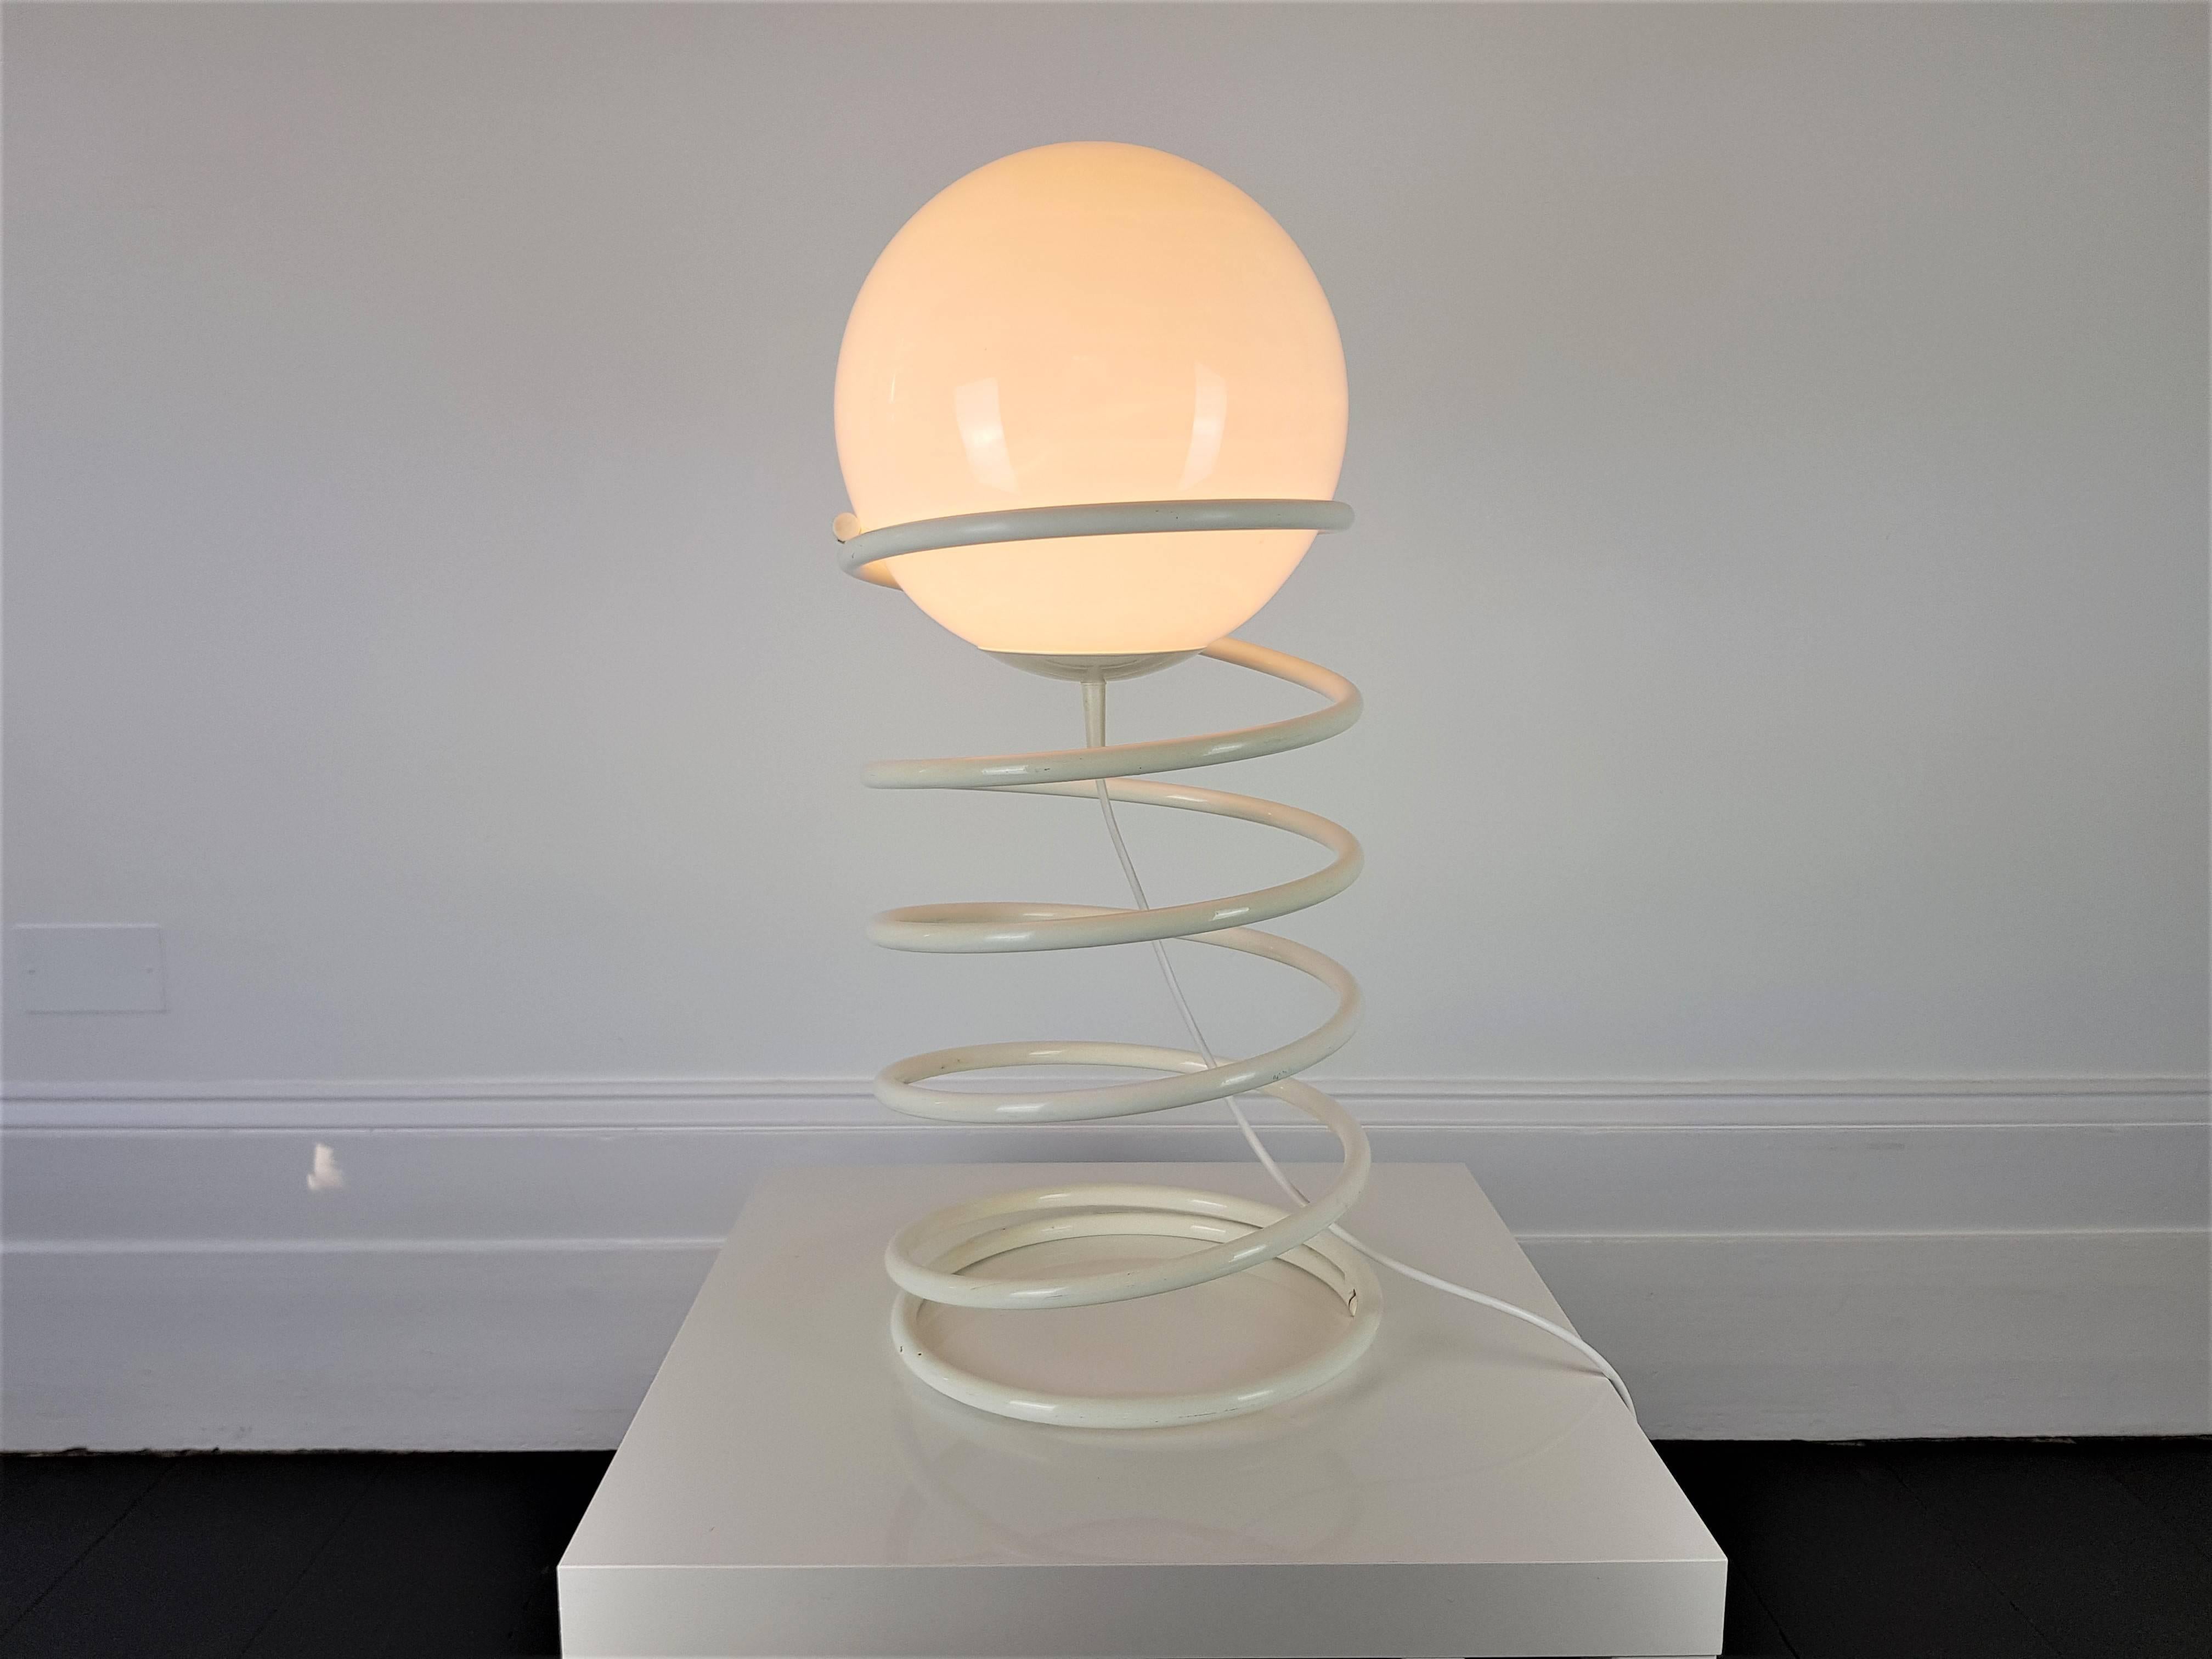 A Dutch 'Woja' floor lamp on a spiral base, produced in the 1970s.

Rewired, fully working and safety tested - E27 / E26 Edison screw fitting.

We provide very competitive global shipping rates per your requirements - please click the 'ask the